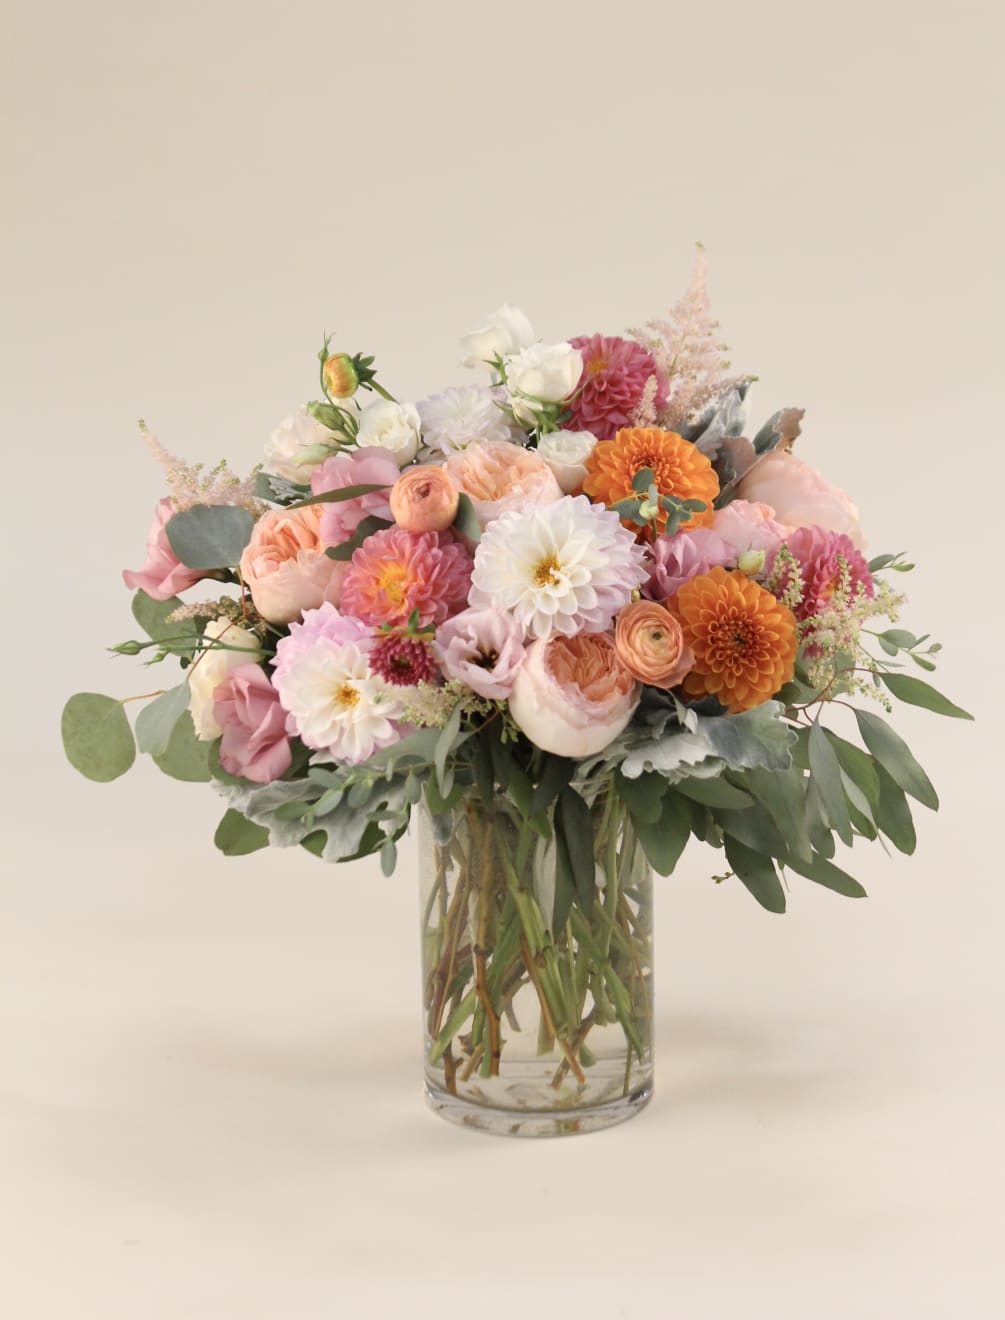 This majestic floral design offers lush summer and fall blooms in an